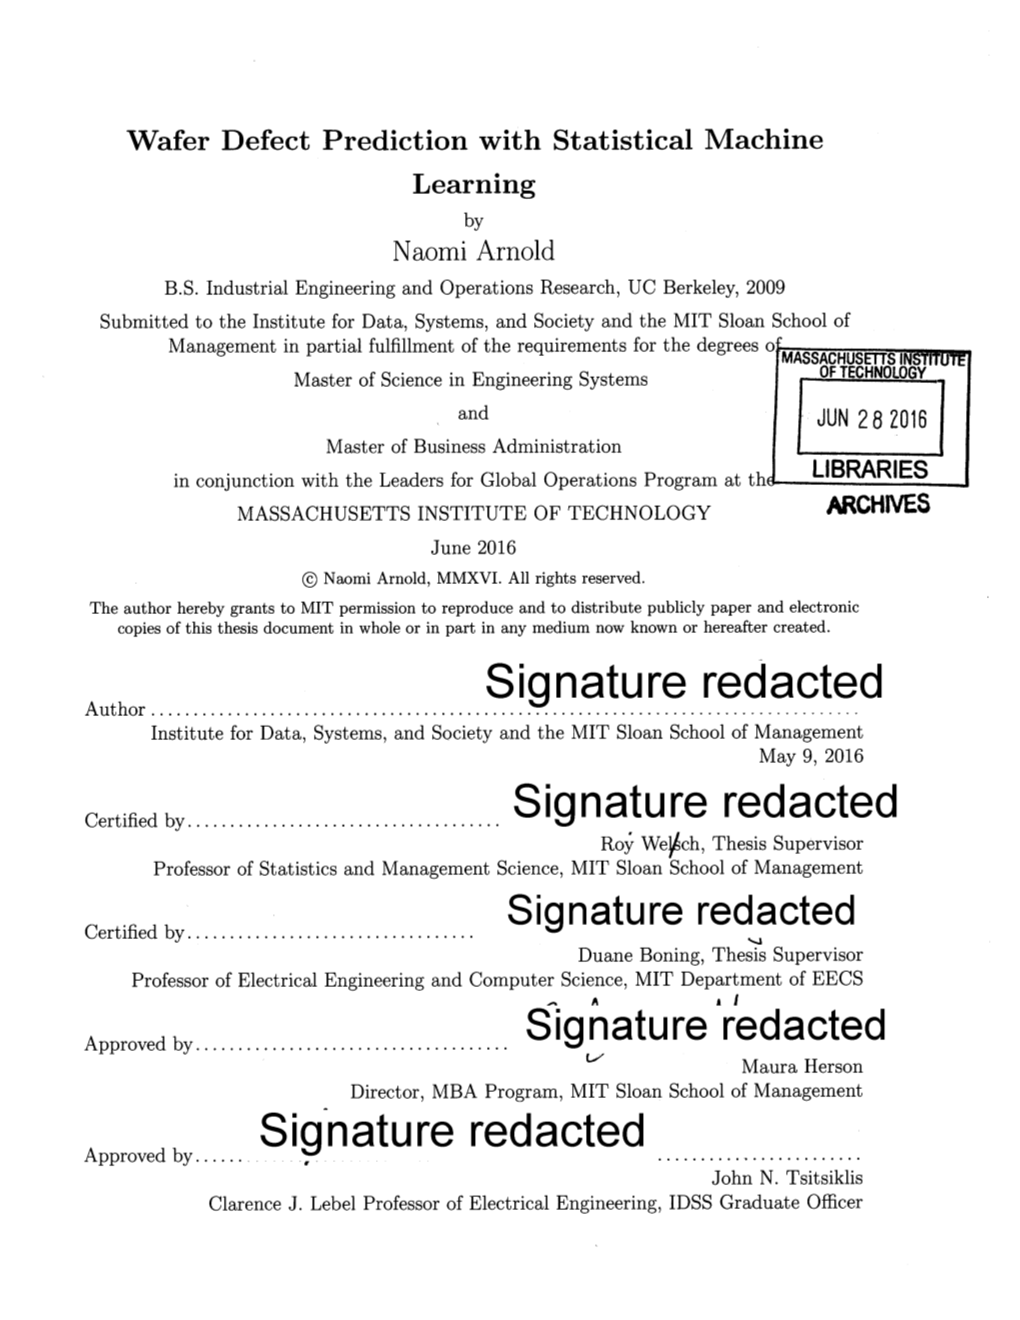 Signature Redacted Roy Welch, Thesis Supervisor Professor of Statistics and Management Science, MIT Sloan School of Management Signature Redacted C Ertified by